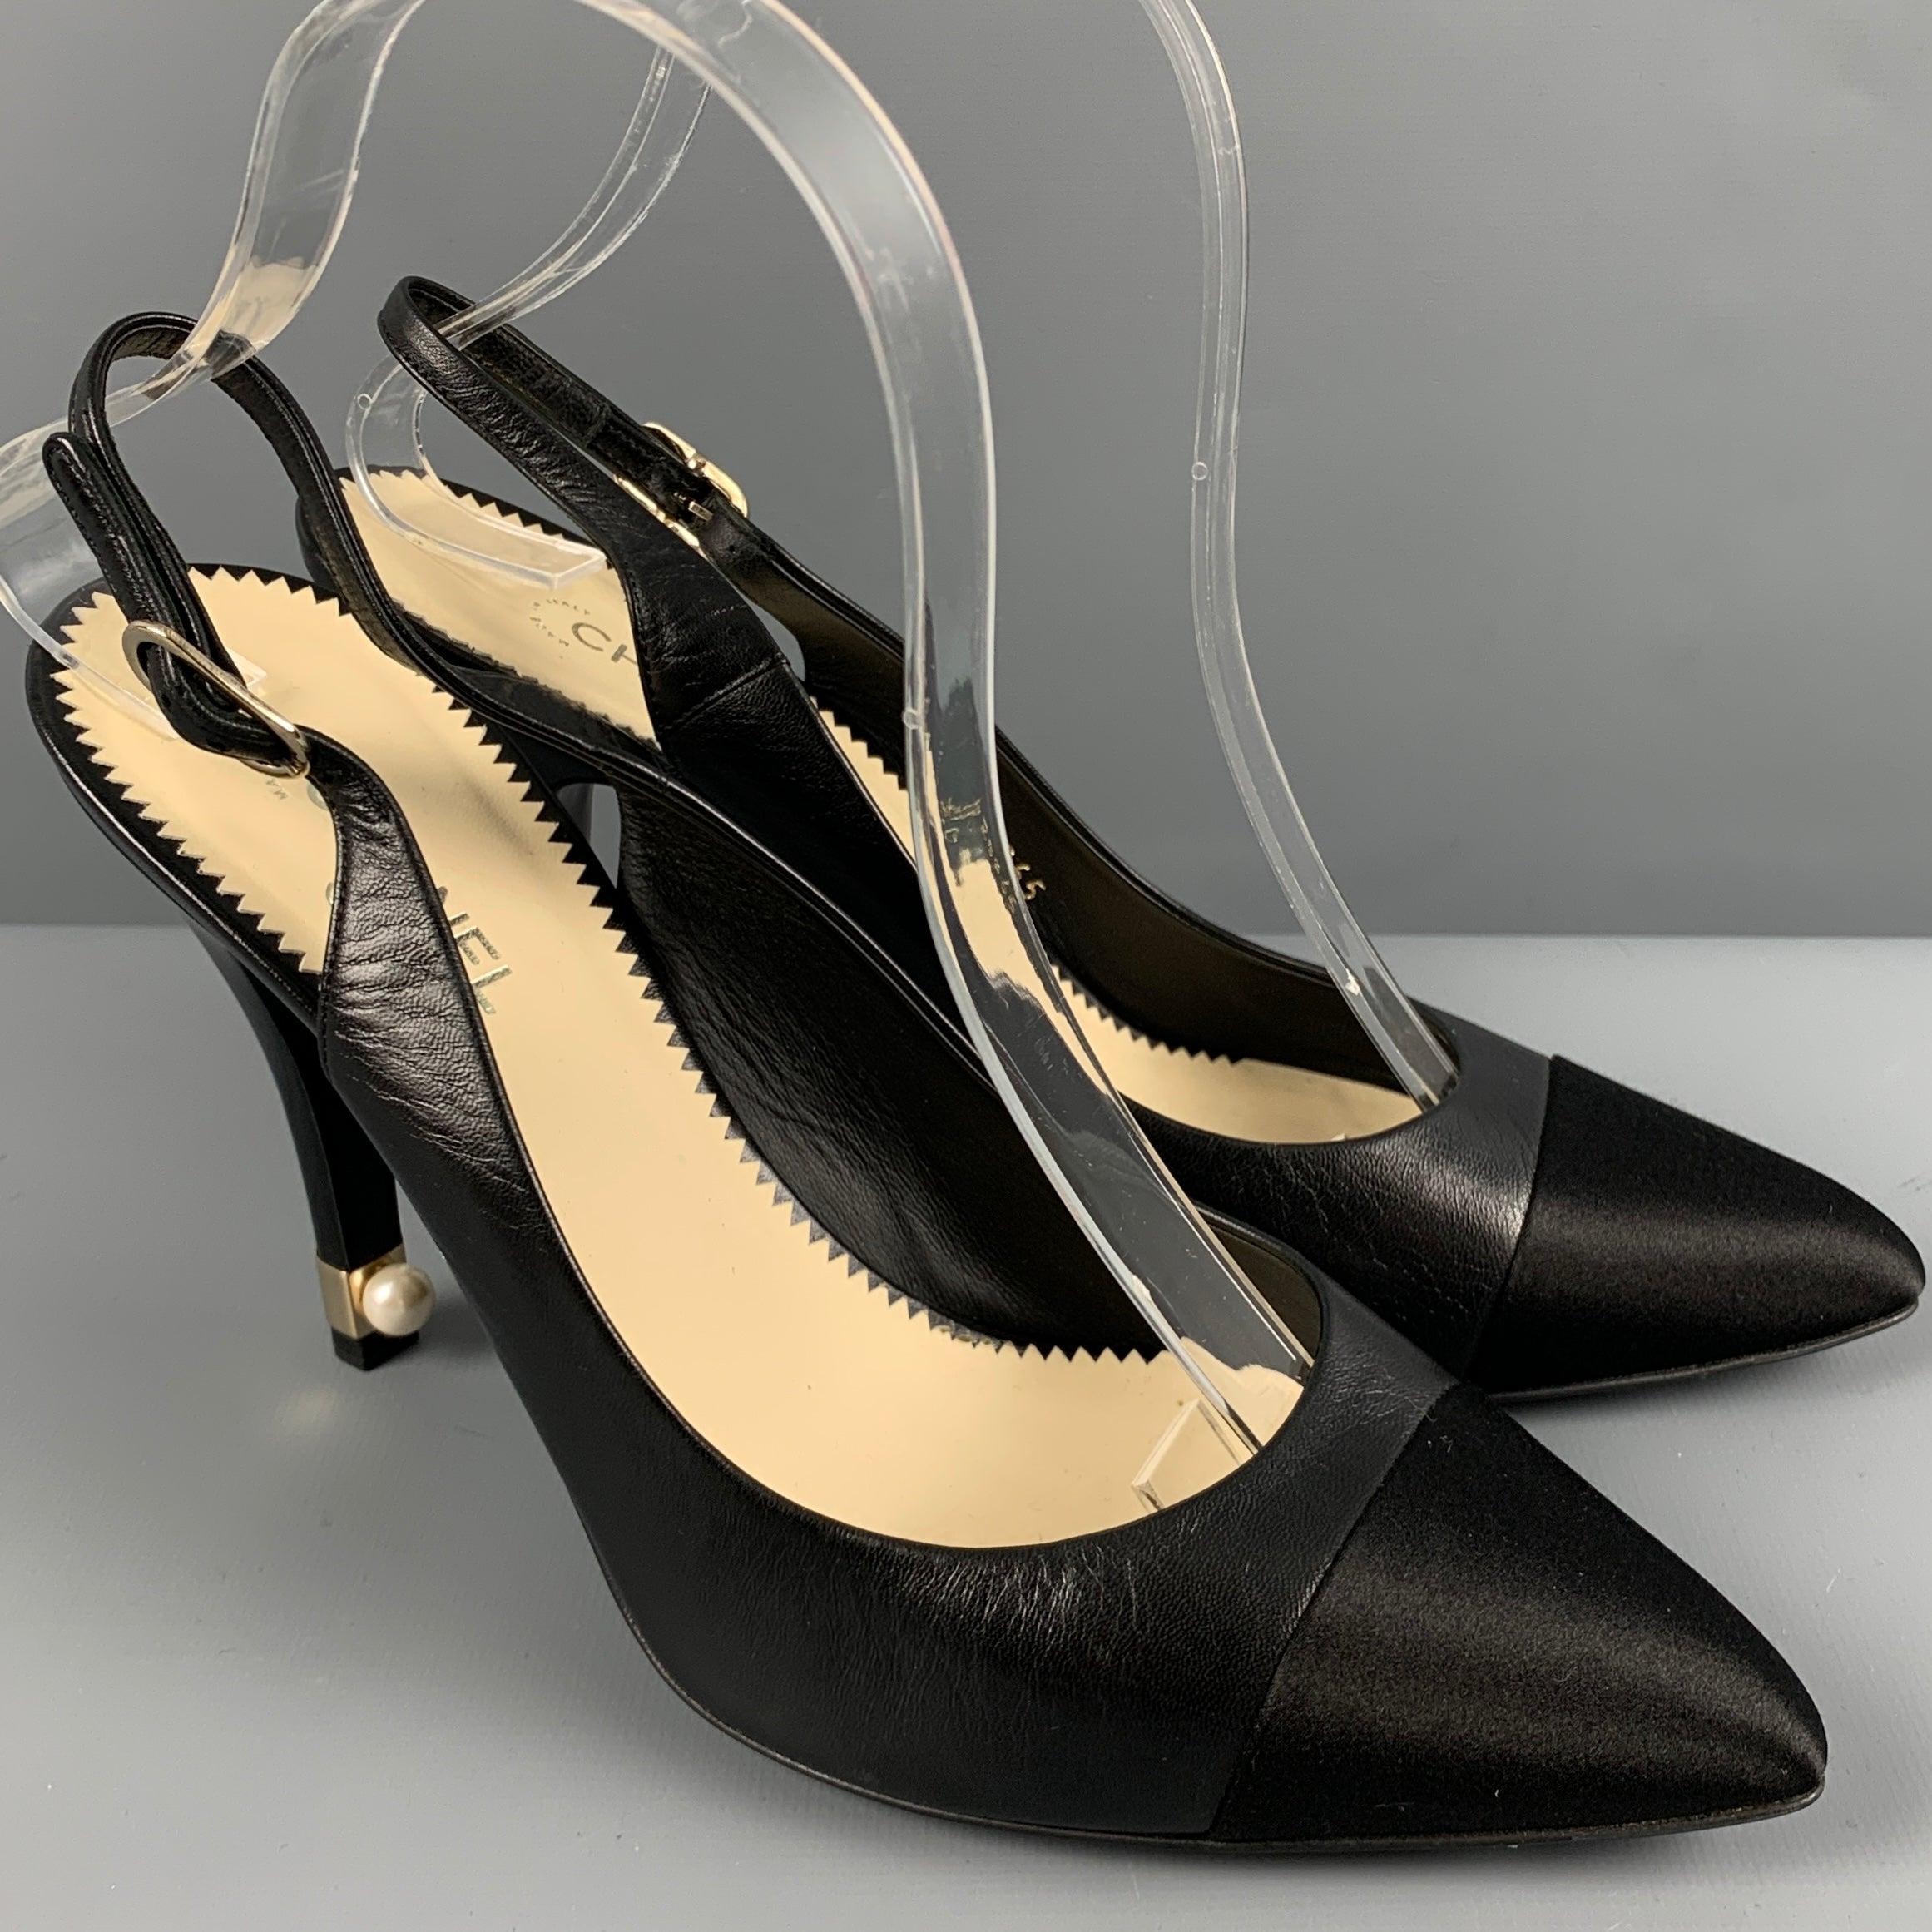 CHANEL Size 9 Black Leather Slingback Pumps In Good Condition For Sale In San Francisco, CA